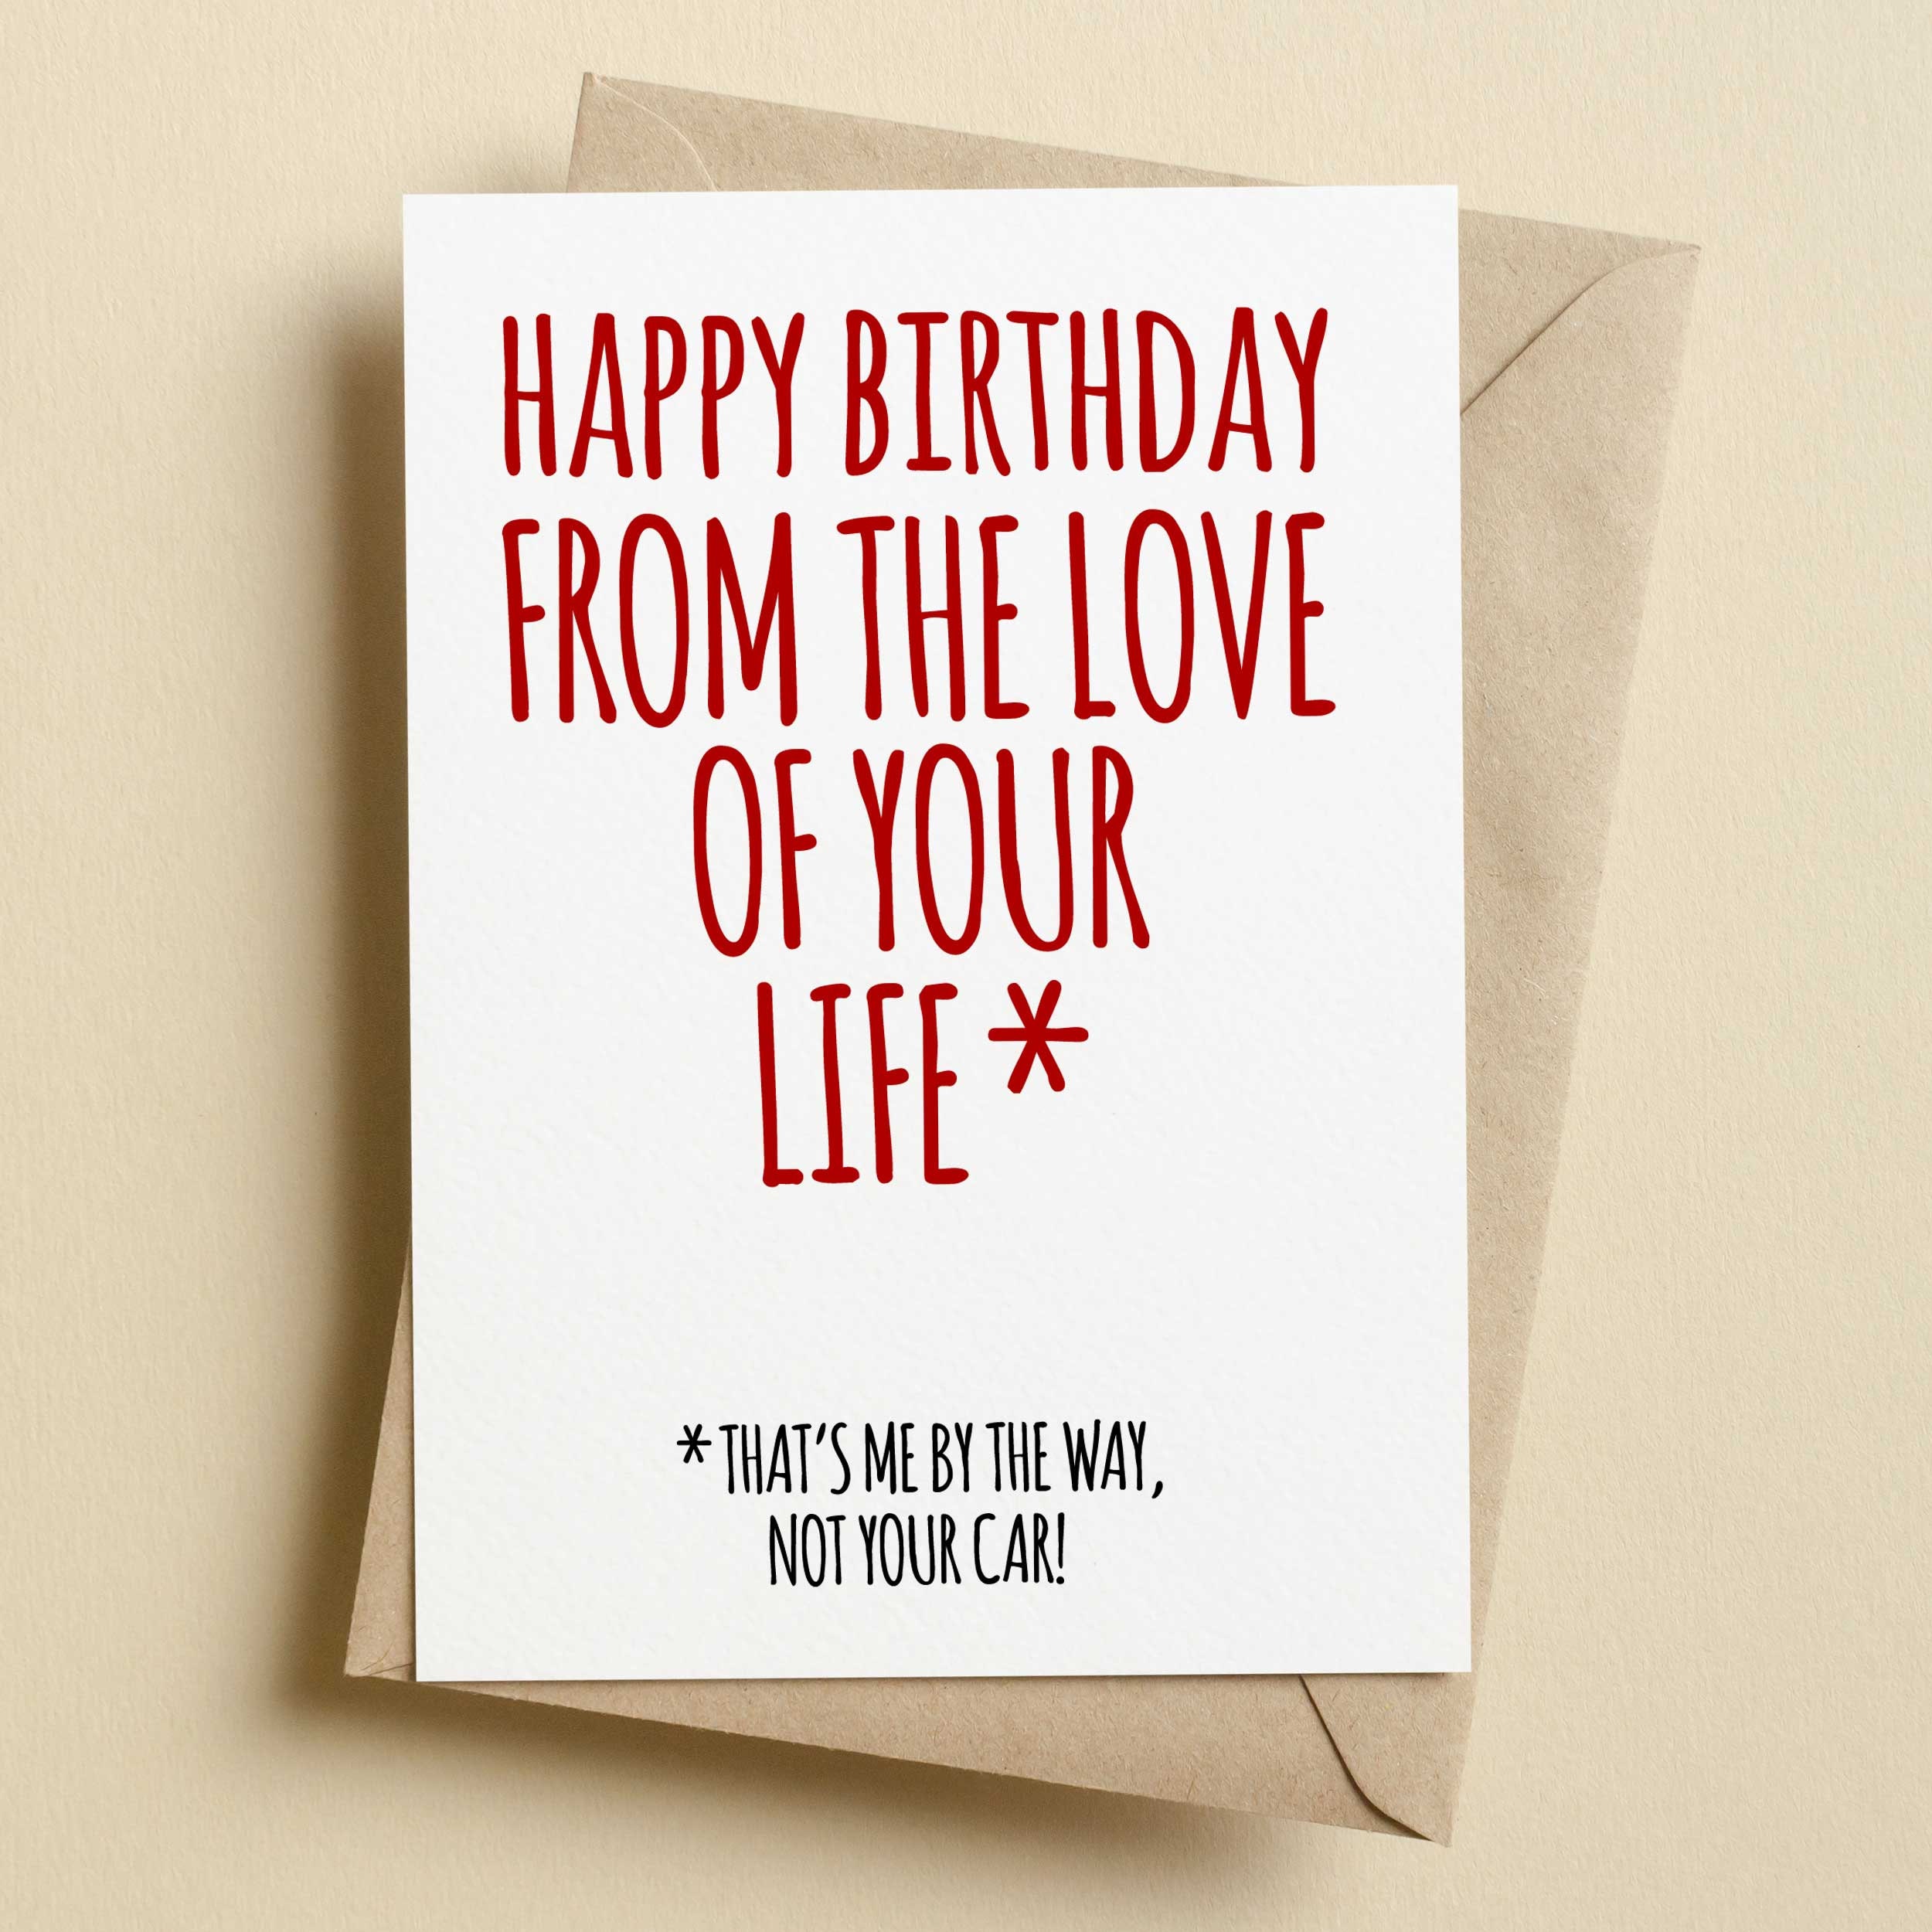 CENTRAL 23 Boyfriend Birthday Card - Husband Birthday Card From Wife -  Funny Birthday Cards For Women Men Him Her - Gifts For Girlfriend Humor -  Comes